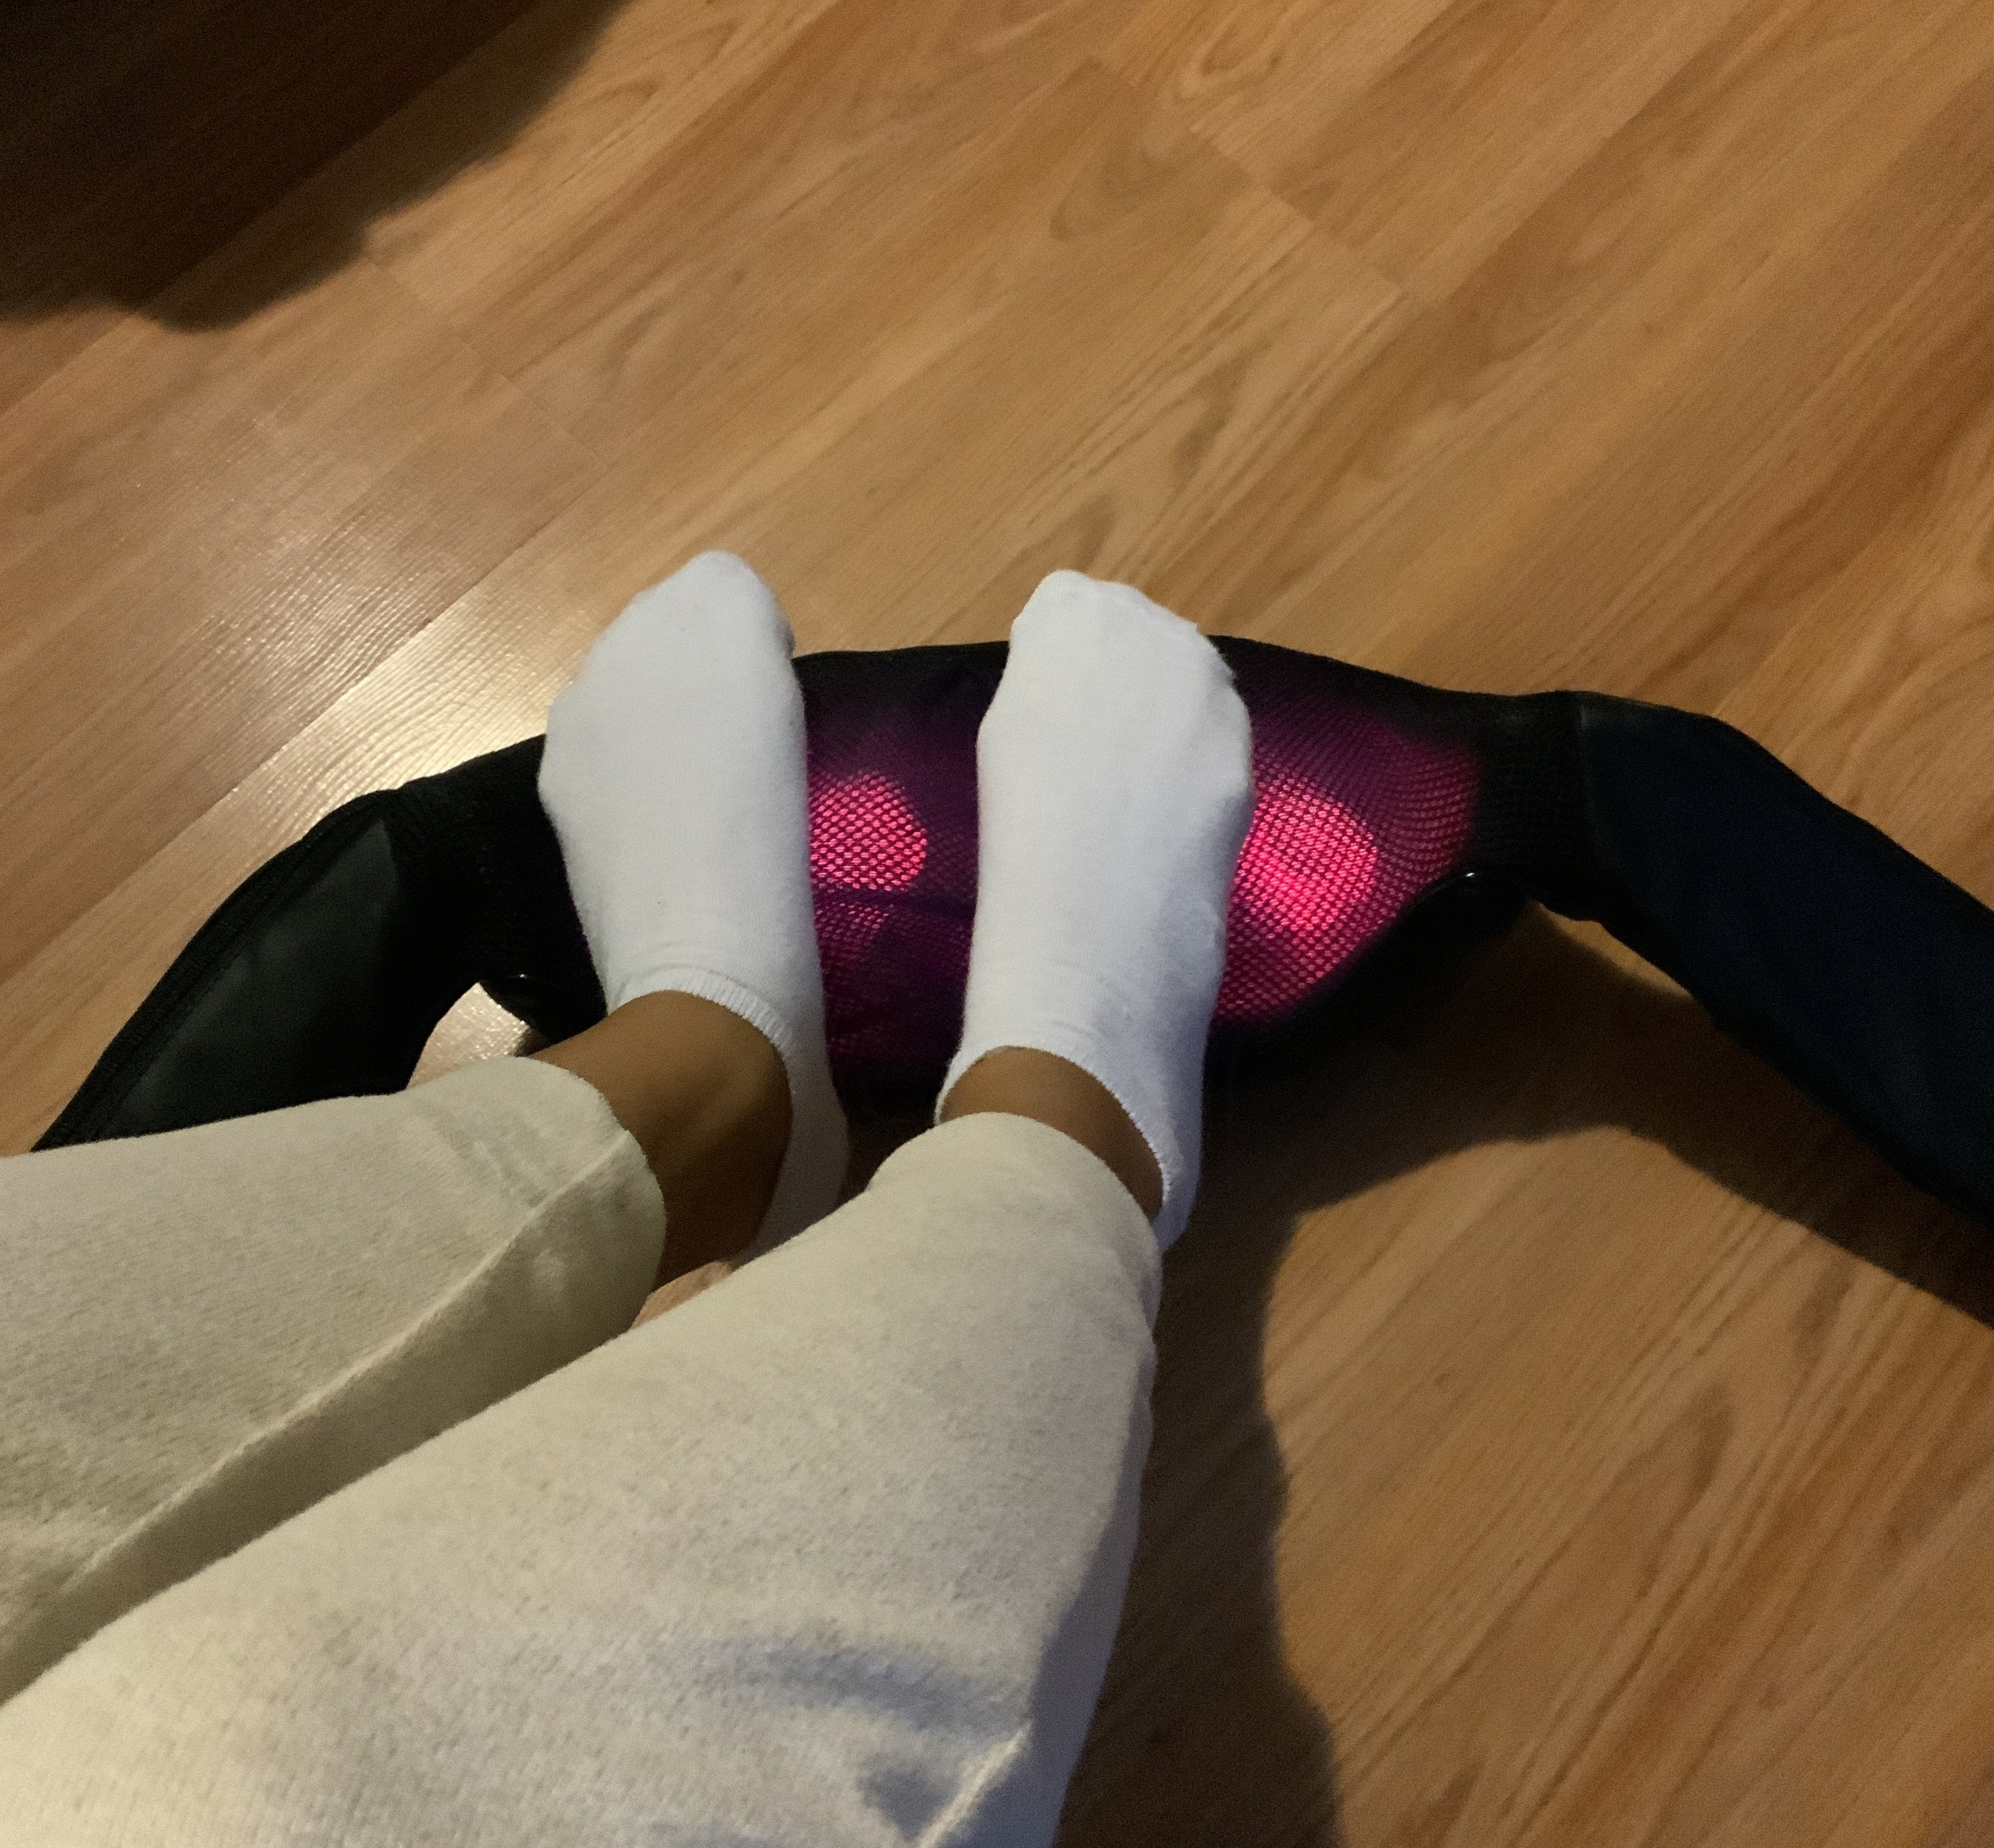 May using the massager on her feet